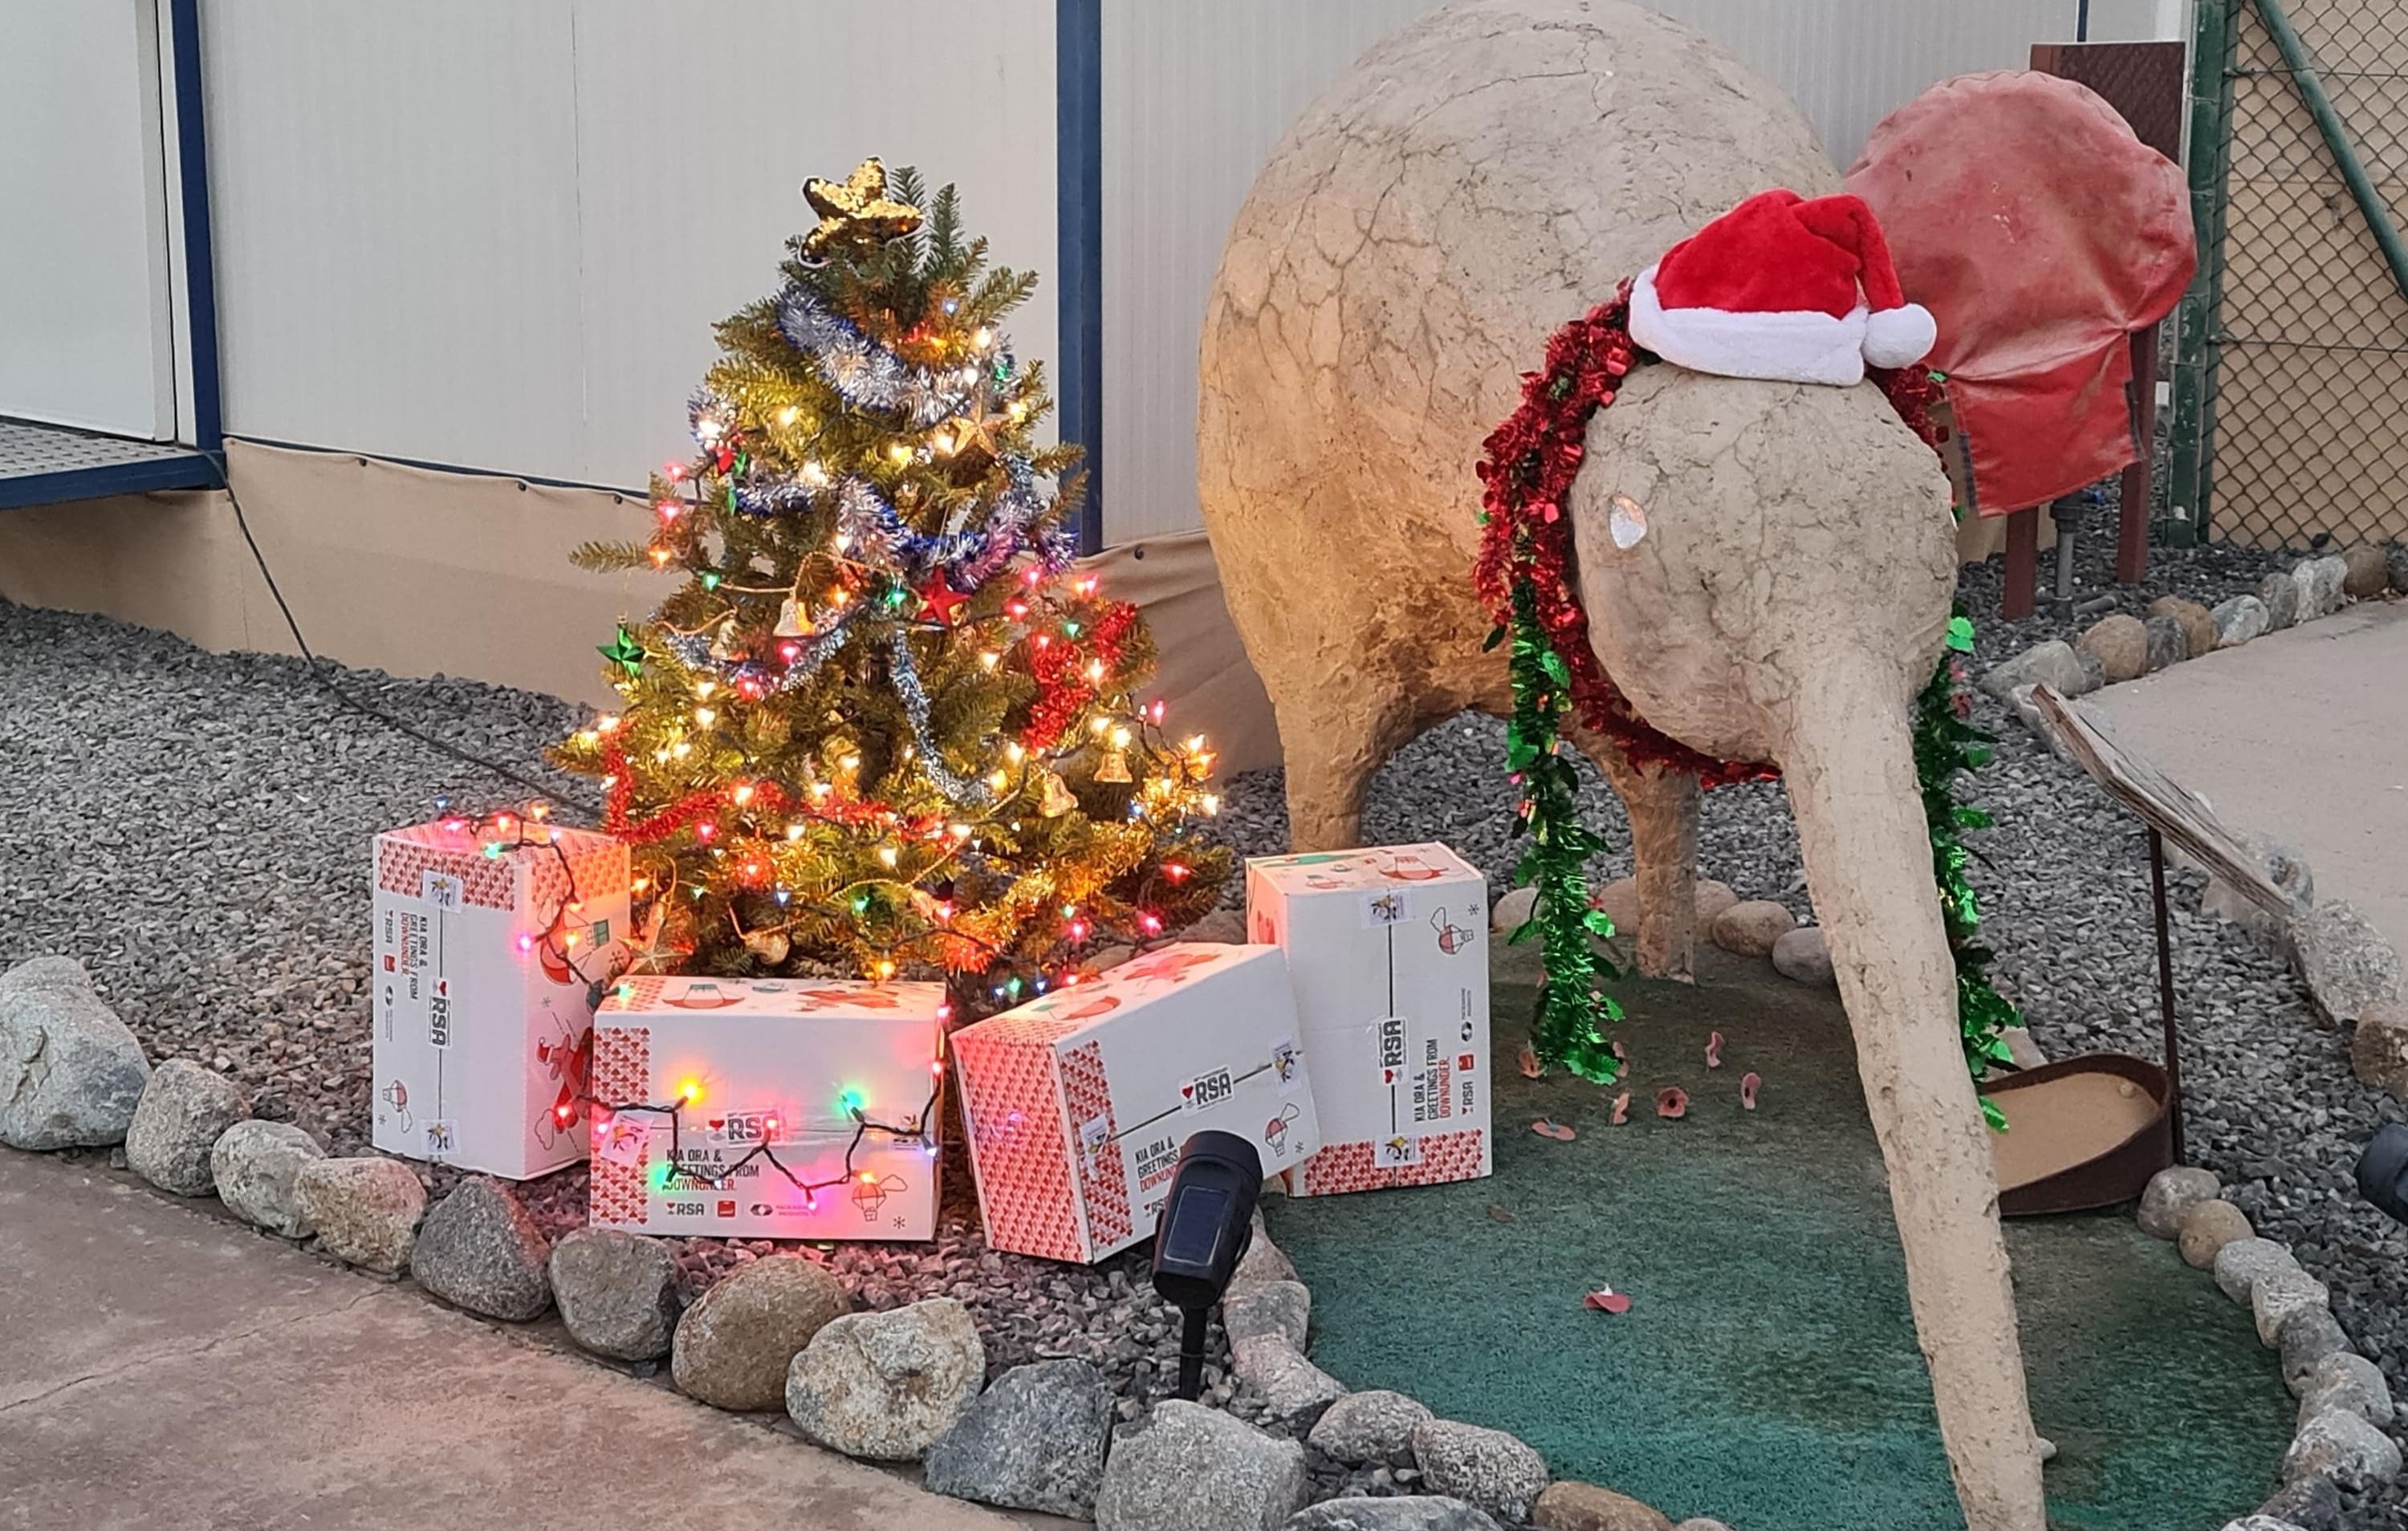 A small group of NZDF personnel are in the Middle East providing logistics support to NZDF missions in the region, and have been looking forward to opening their RSA Christmas parcels.